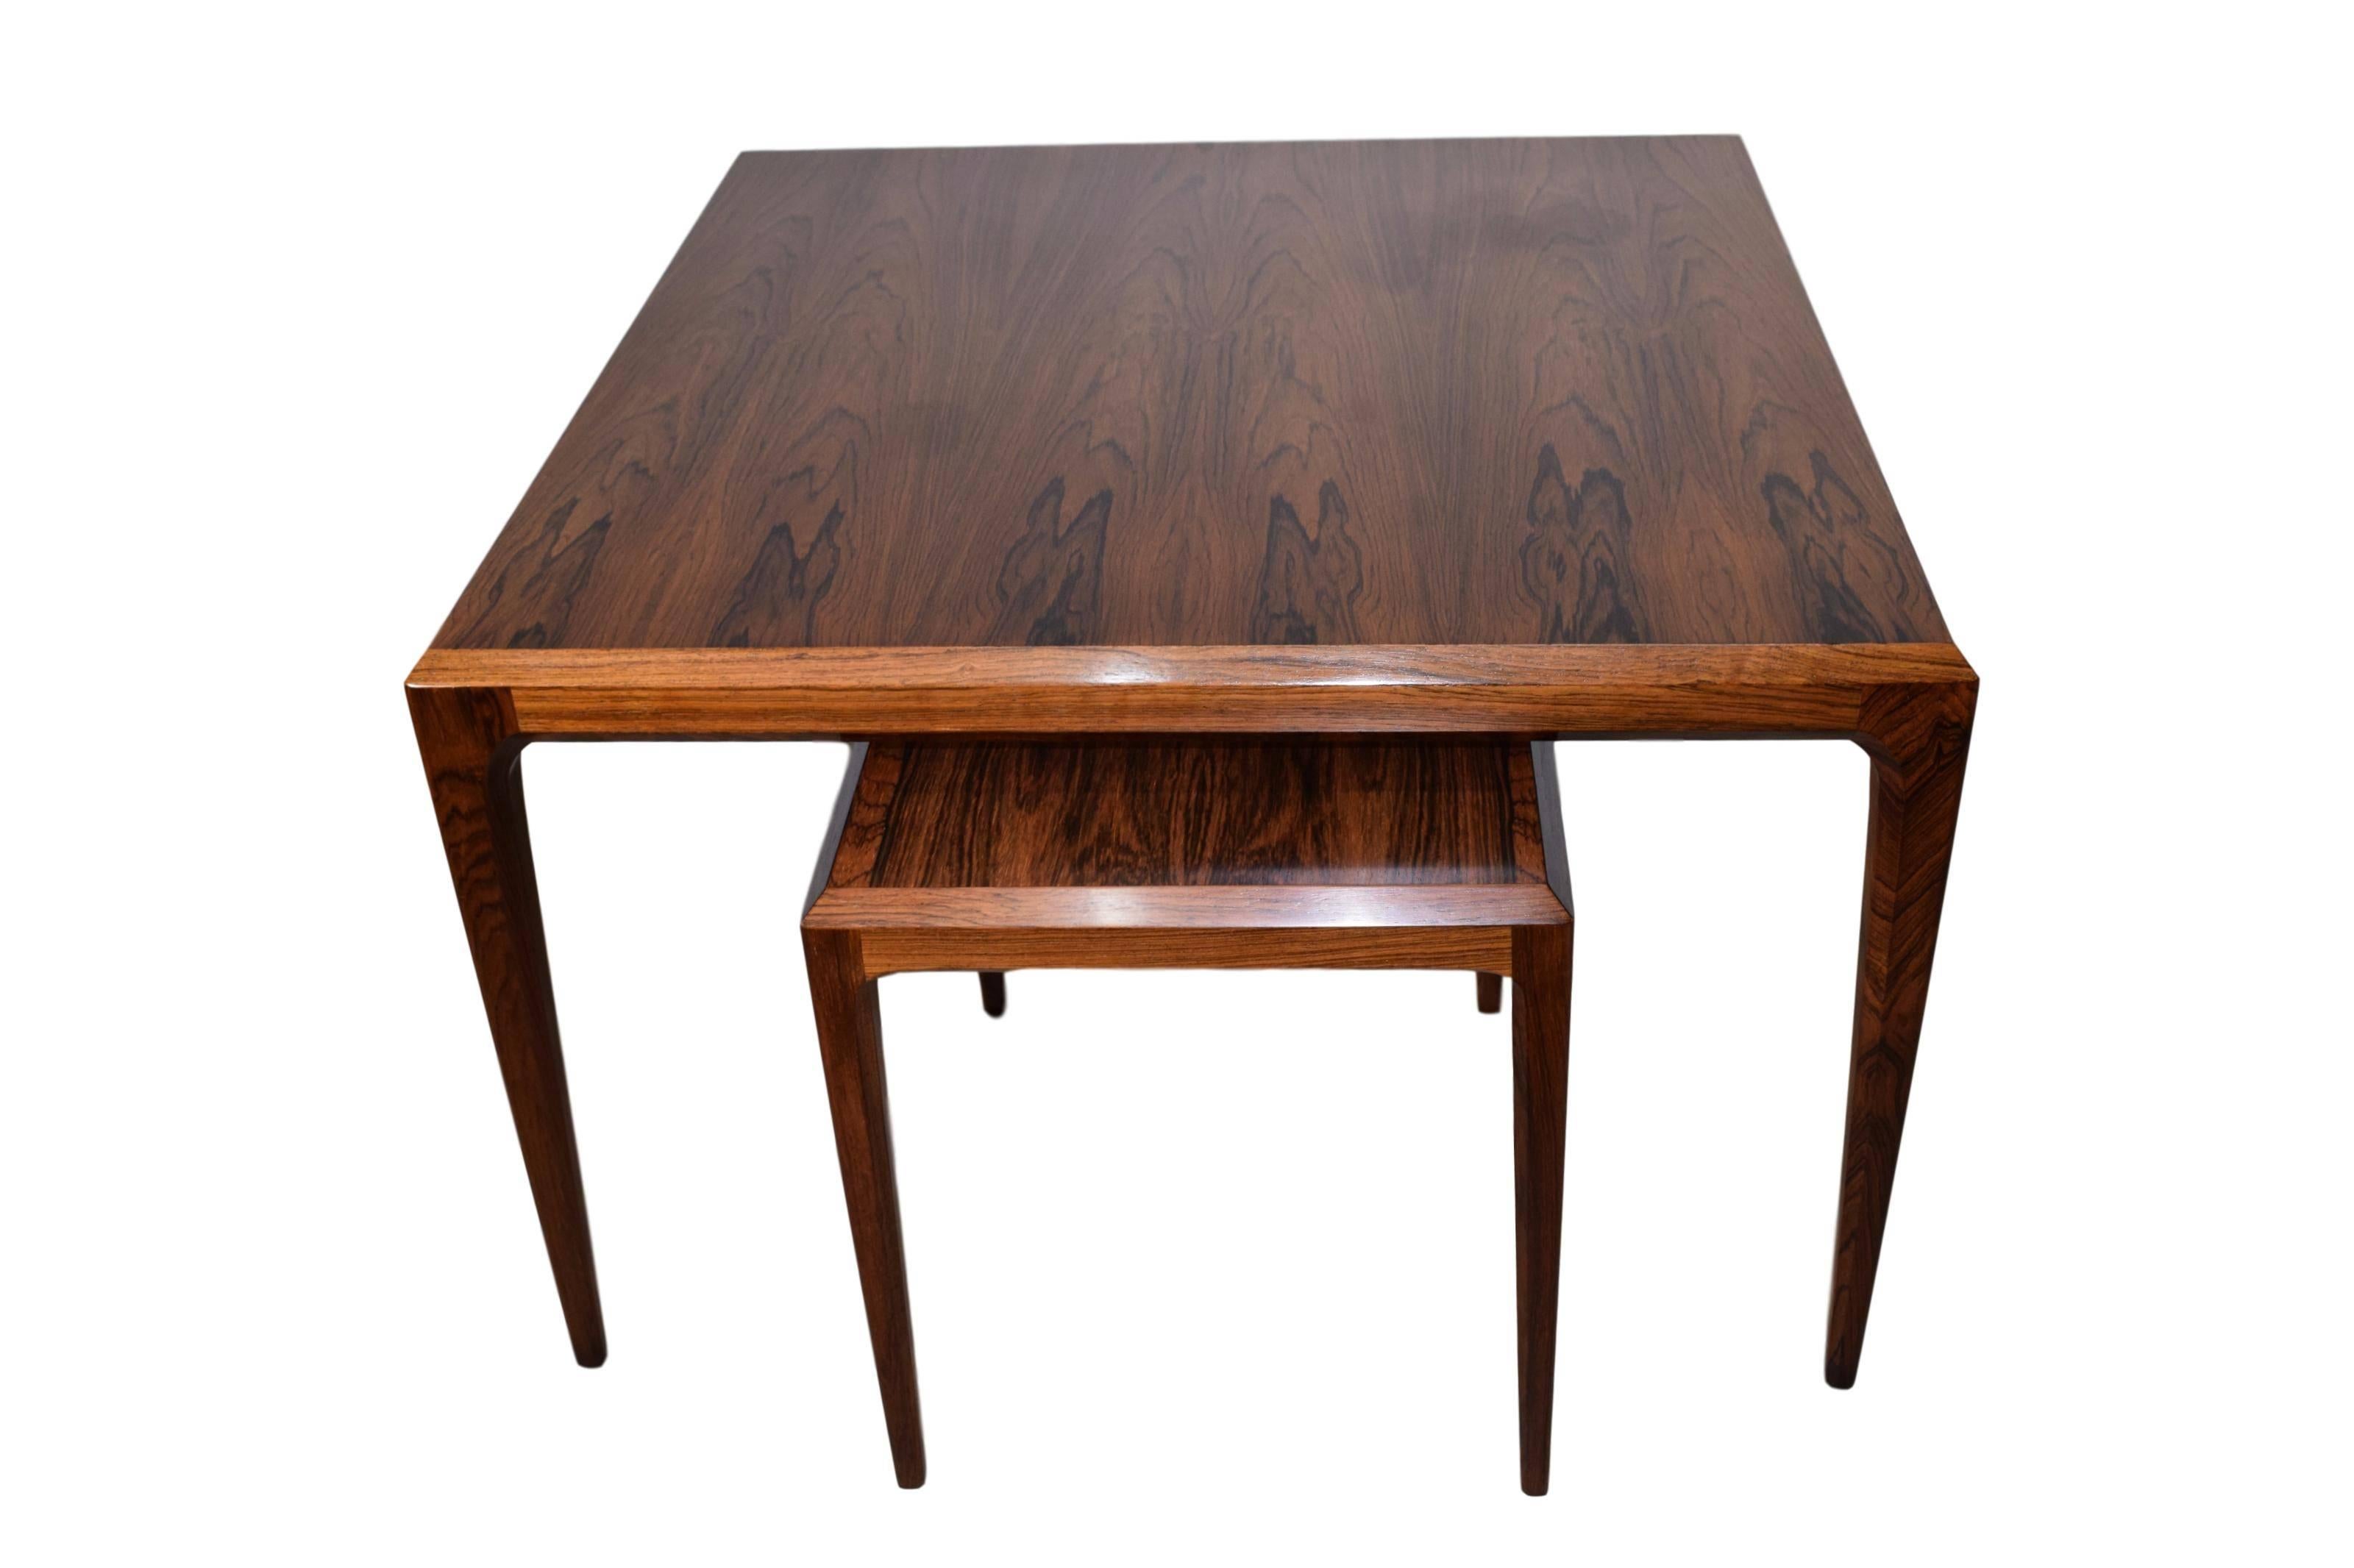 A pair of Danish midcentury rosewood tables by Johannes Andersen. Produced by CFC Silkeborg. One square coffee table and one rectangular side table. Marked by the manufacturer. 

Measures: 76 x 76 x 50 cm and 44 x 36 x 42 cm.

     